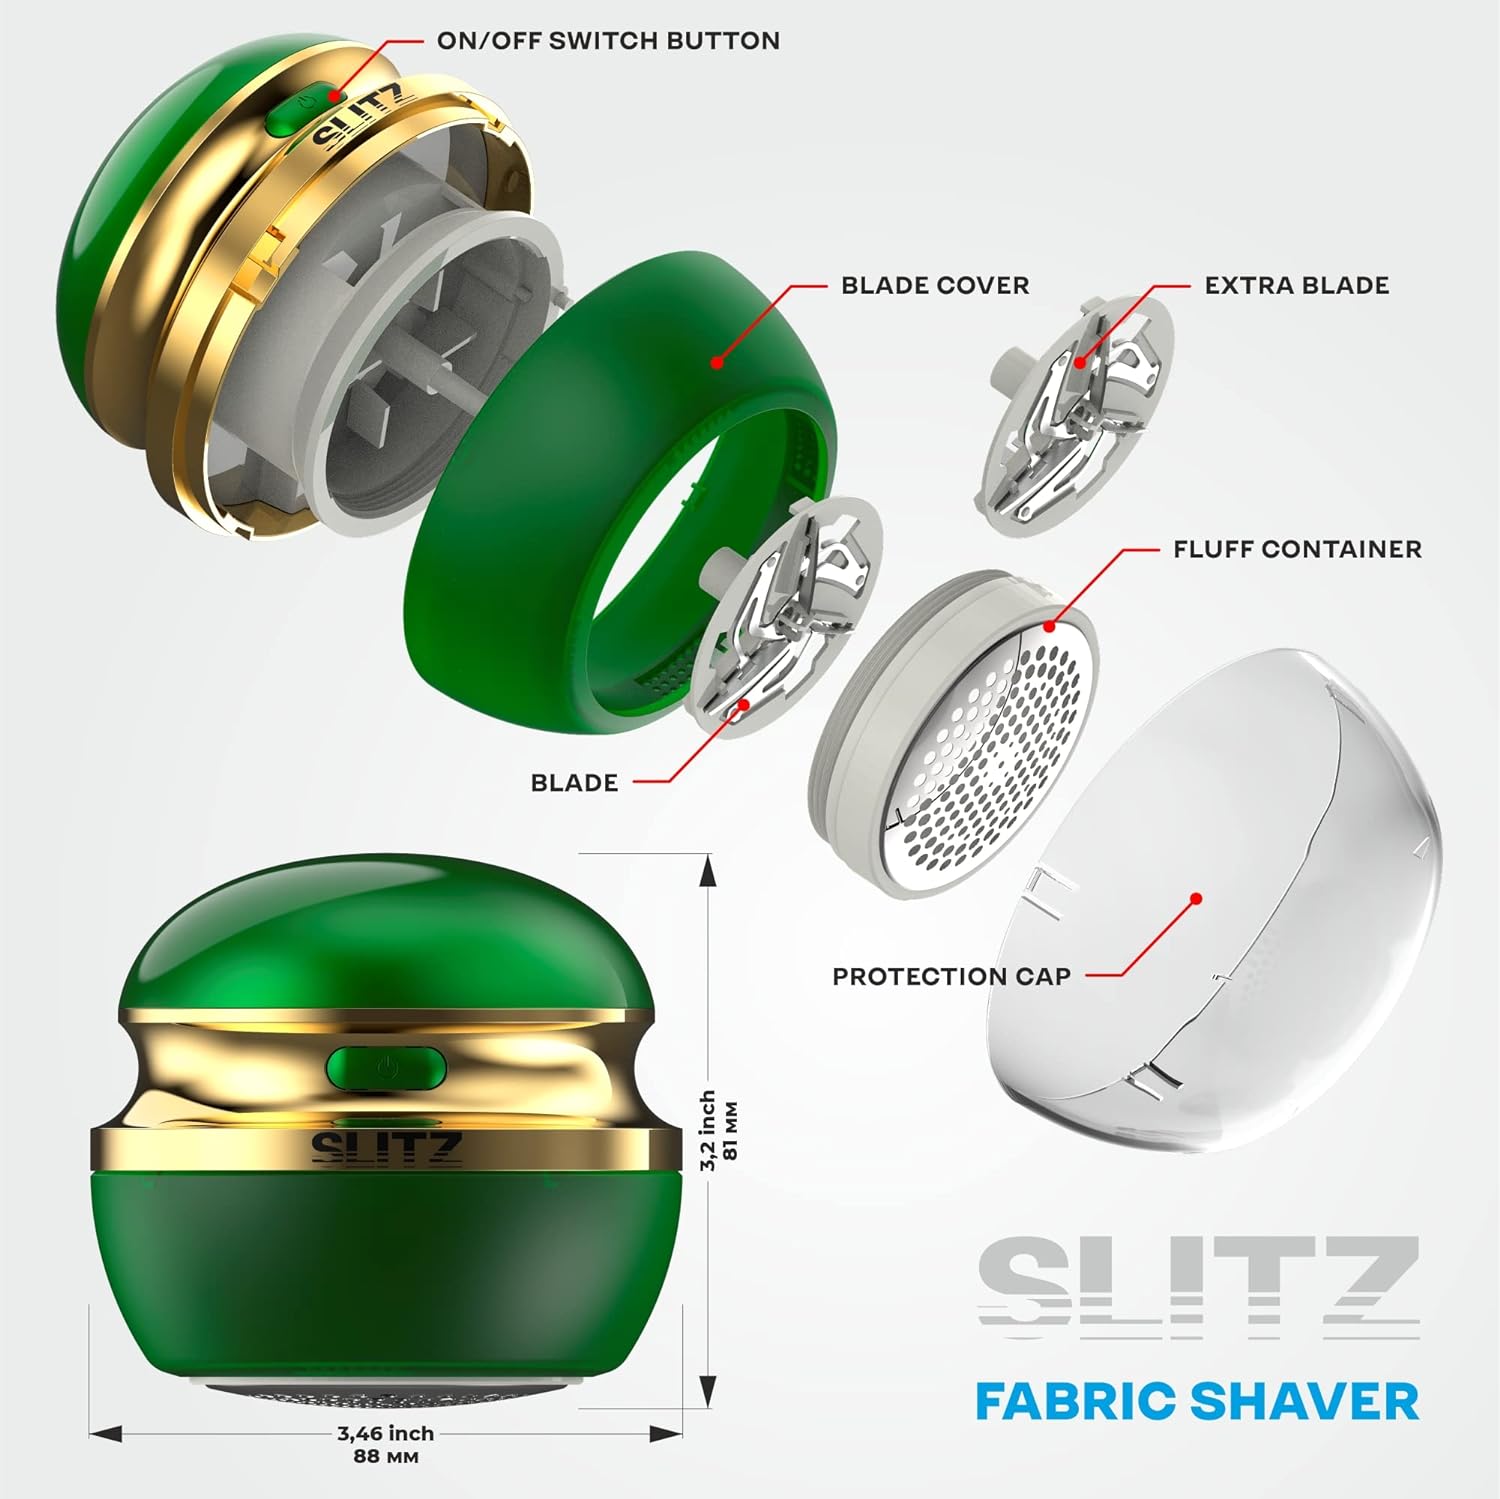 Rechargeable Fabric Shaver - Fabric Shaver Fuzz Remover - Mini Portable Shaving Machine for Clothes - Sweater Defuzzer - Fabric Shaver for Furniture - Travel Lint Remover with Extra Blade - Green